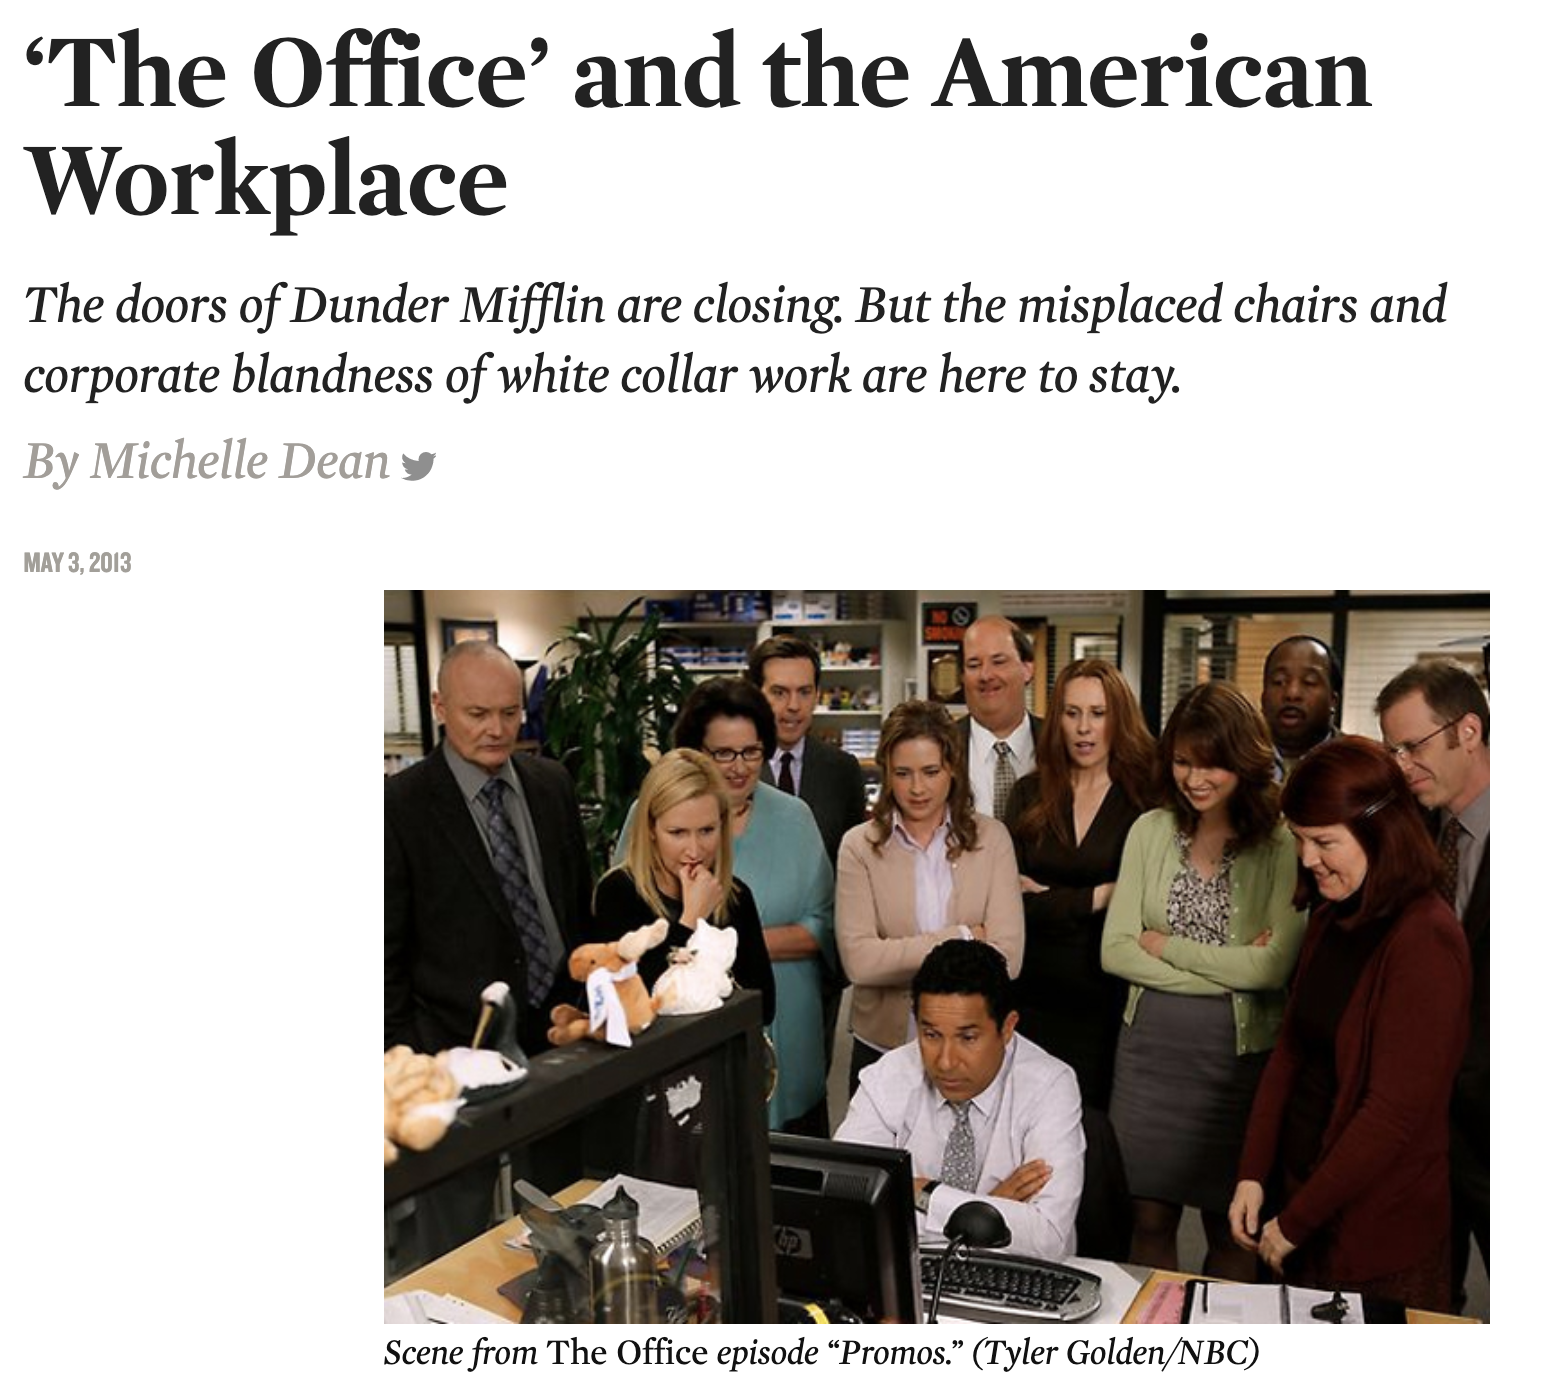   https://www.thenation.com/article/archive/office-and-american-workplace/  